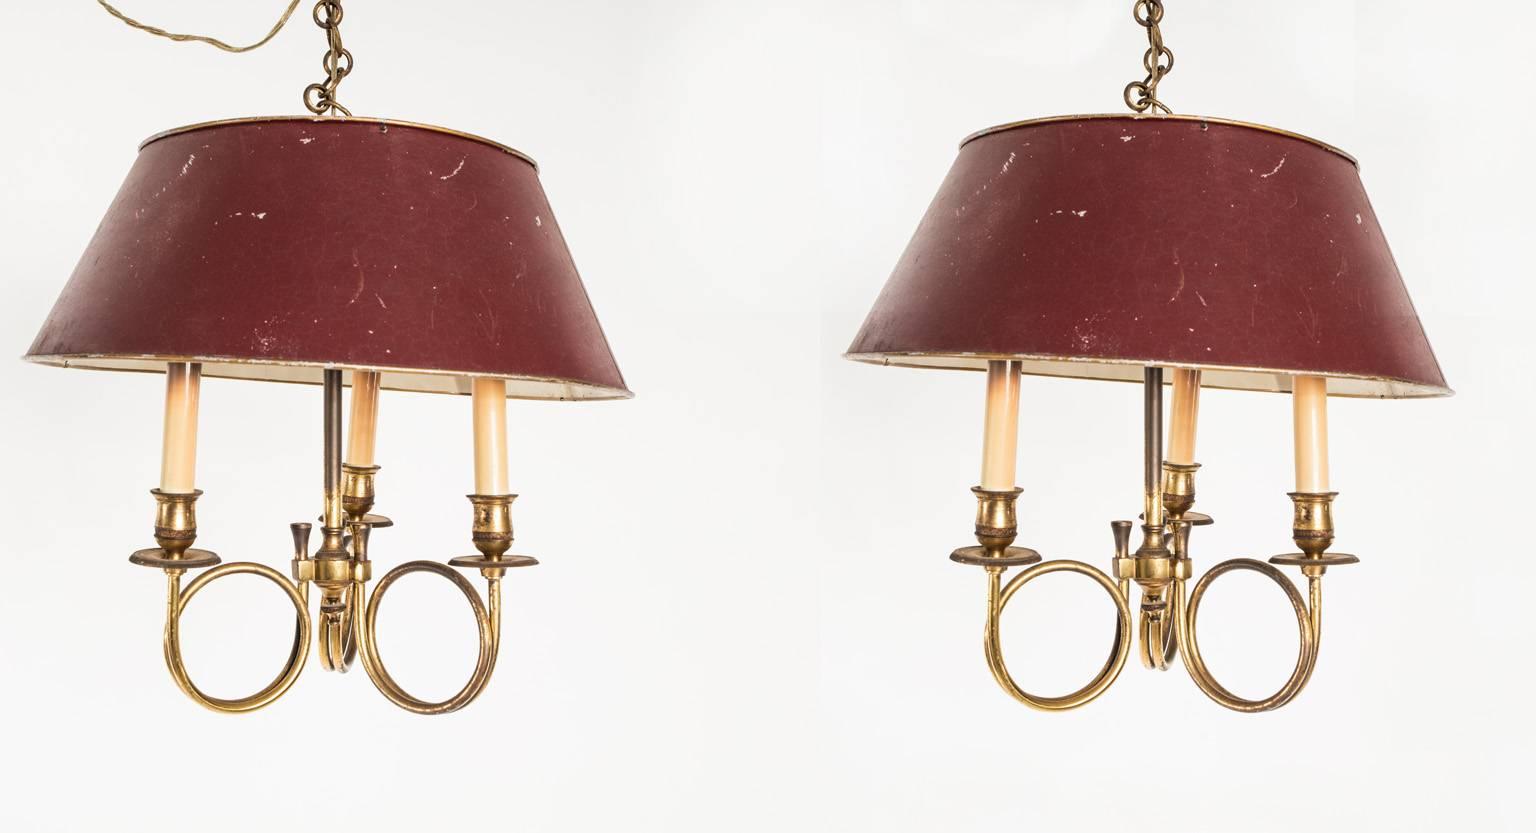 Pair of brass light fixtures with burgundy colored shades.